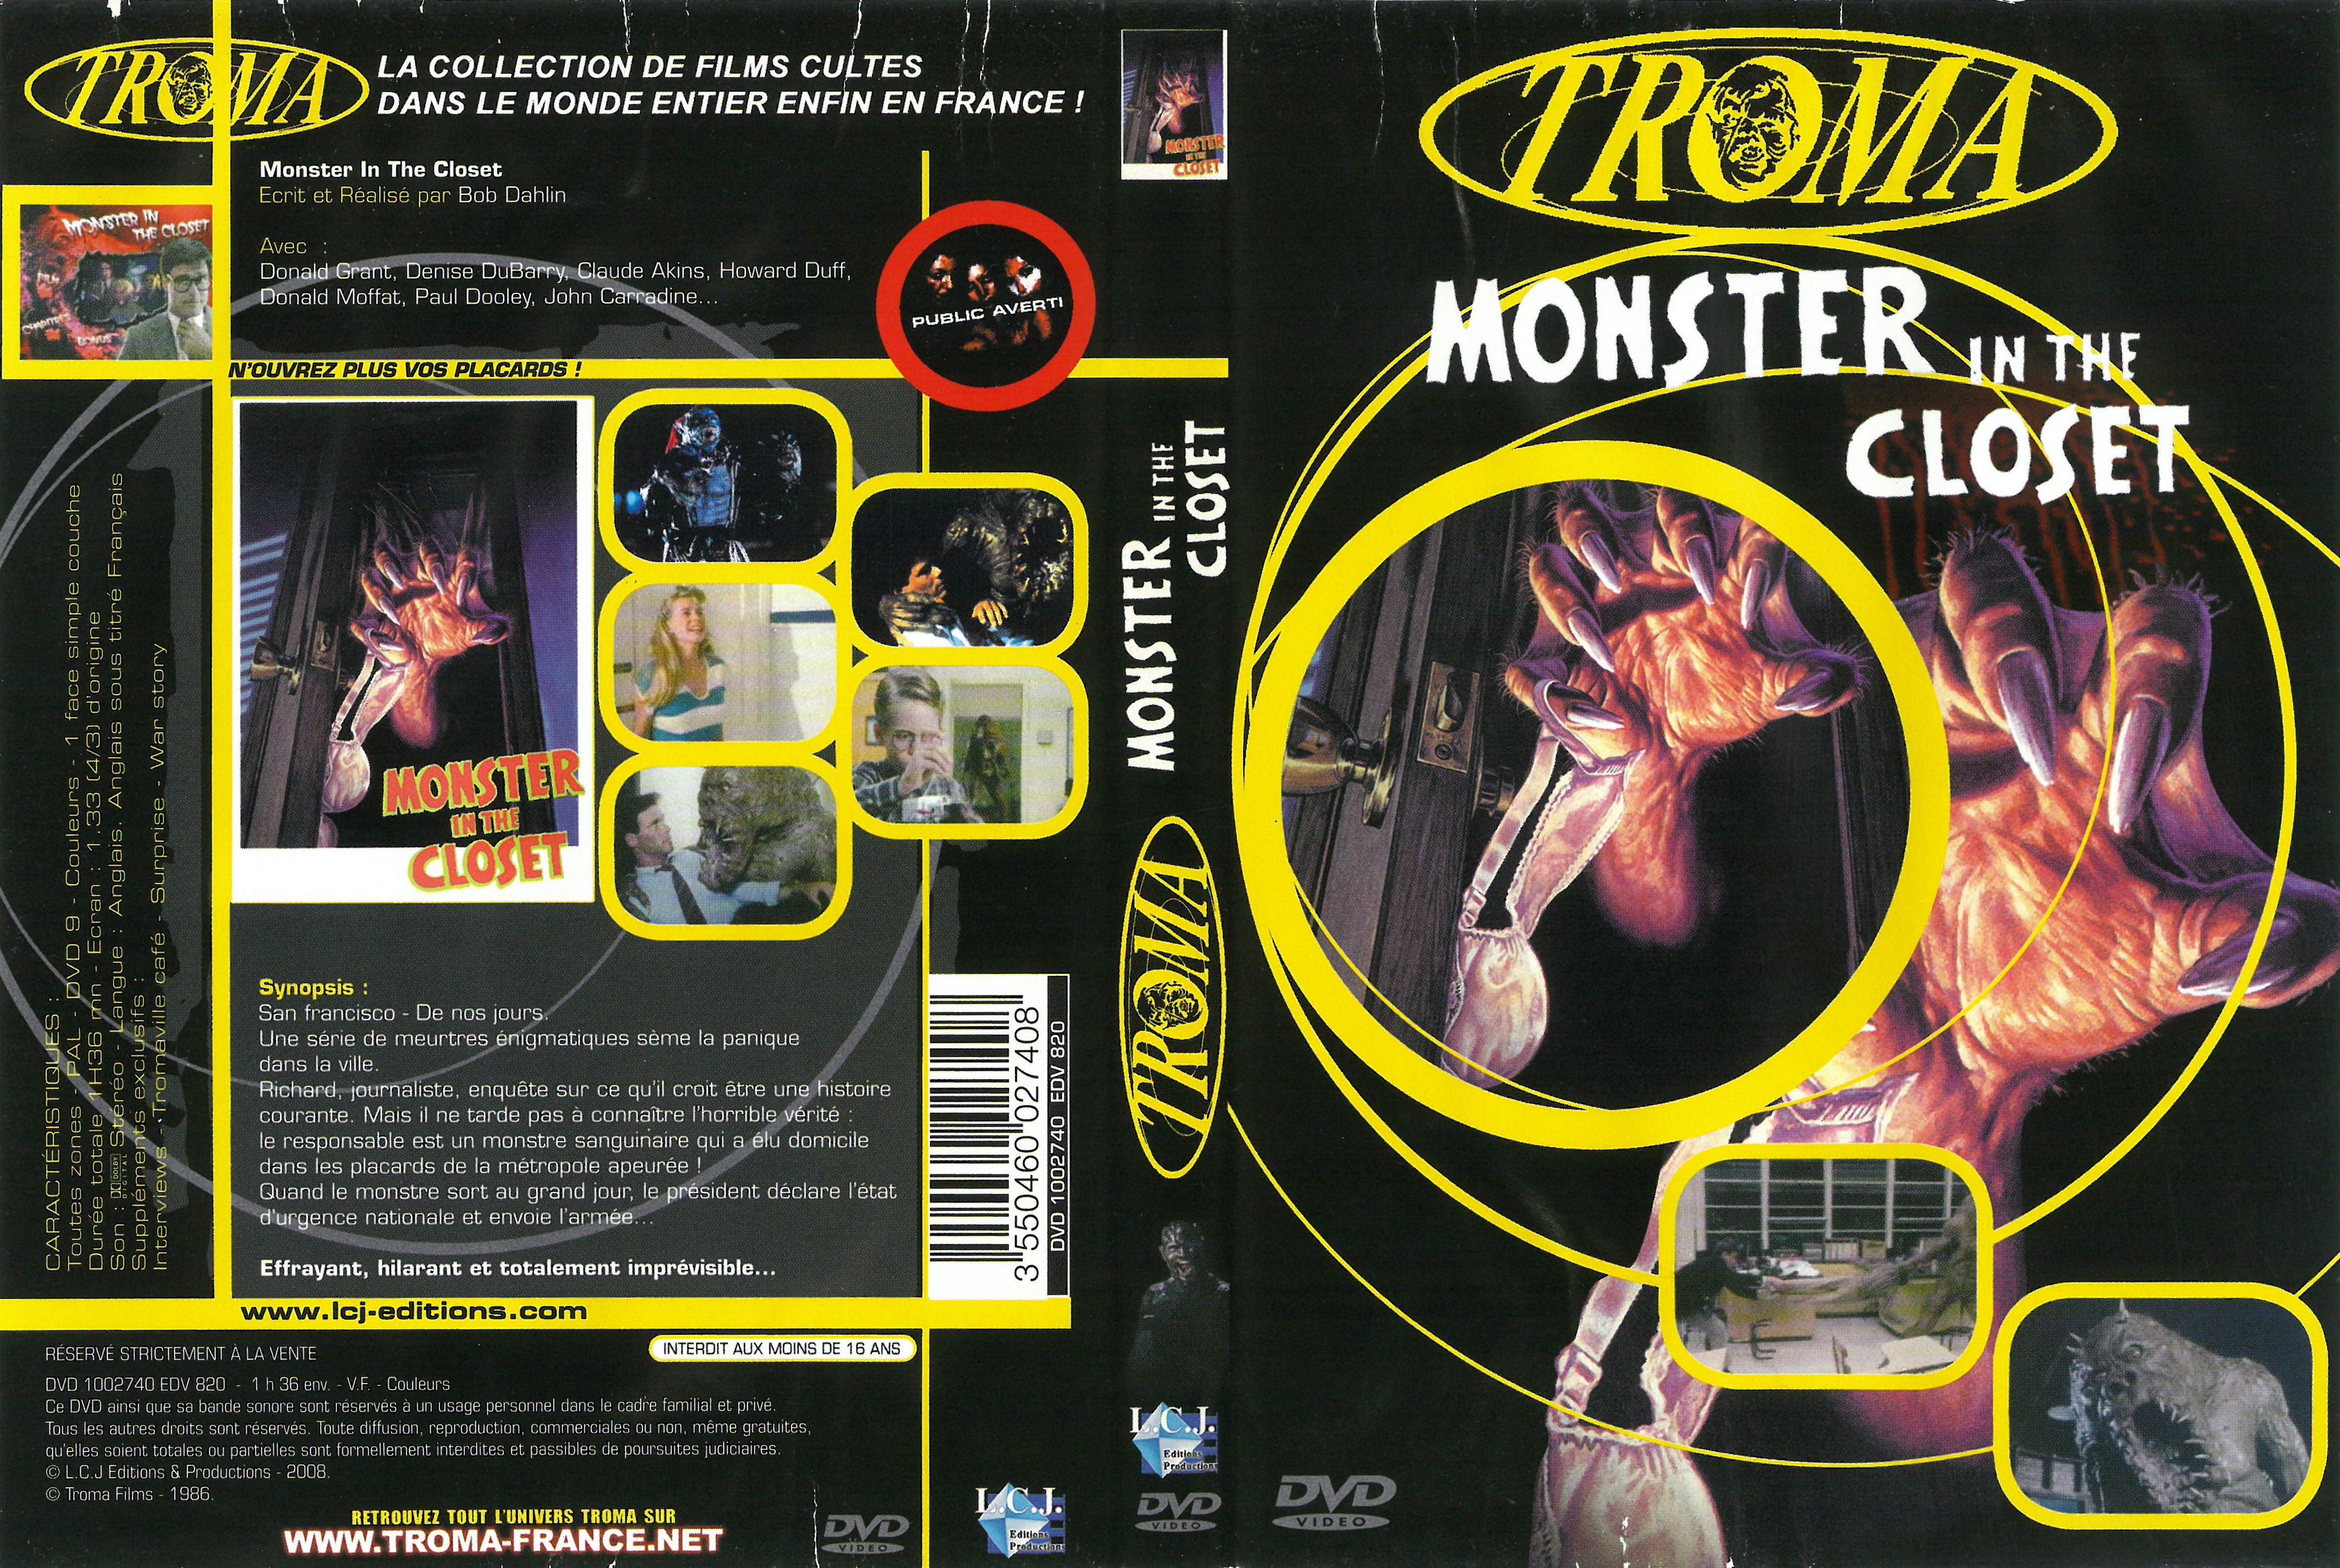 Jaquette DVD Monster in the closet